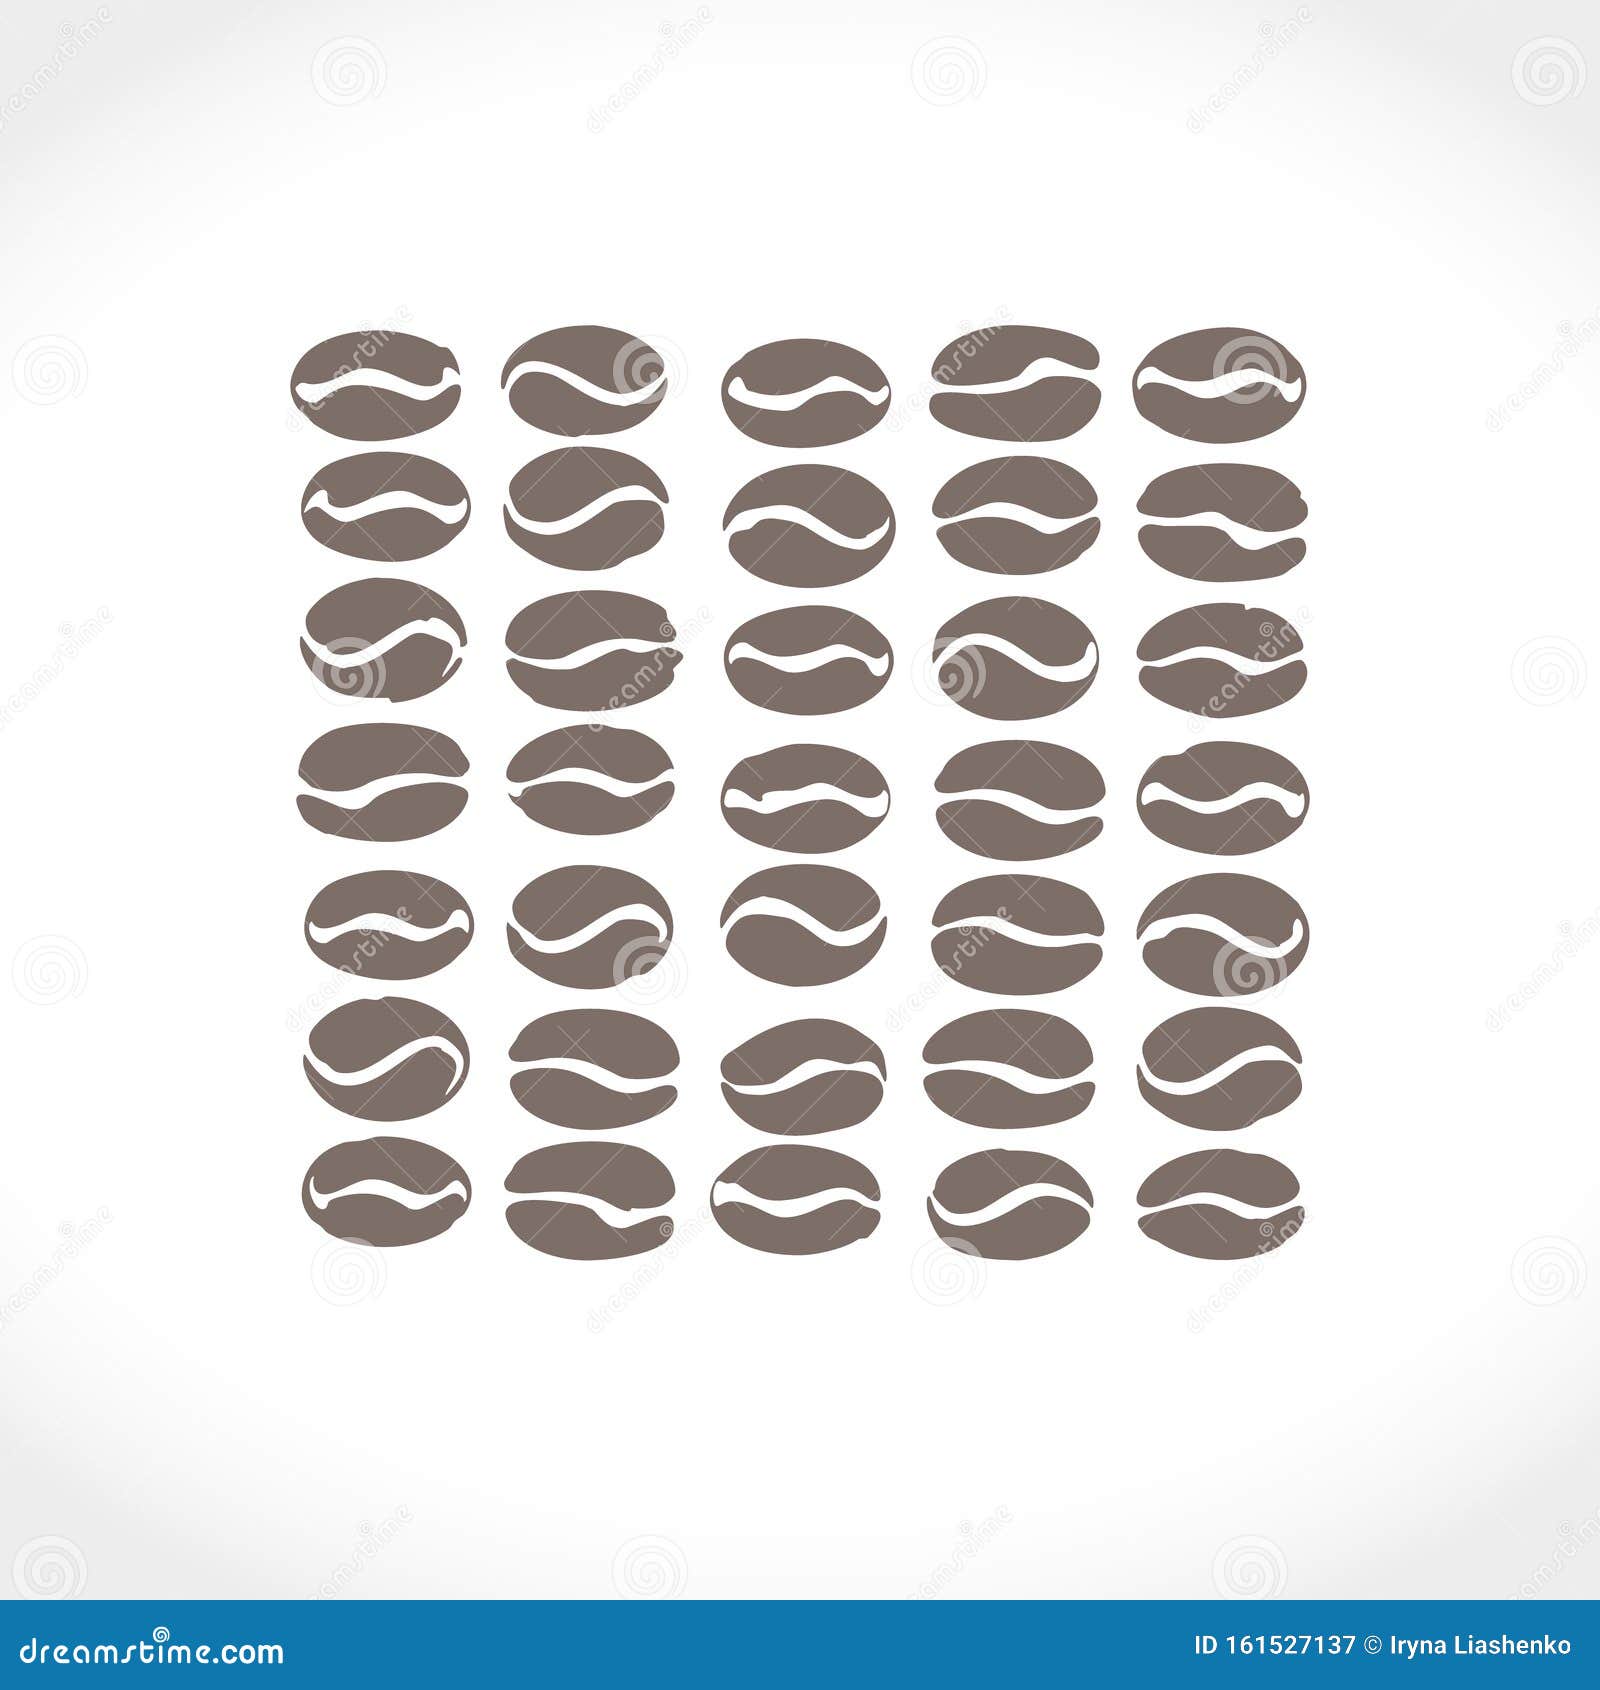 Download Flat Vector Illustration Of Coffee Beans. Coffee ...